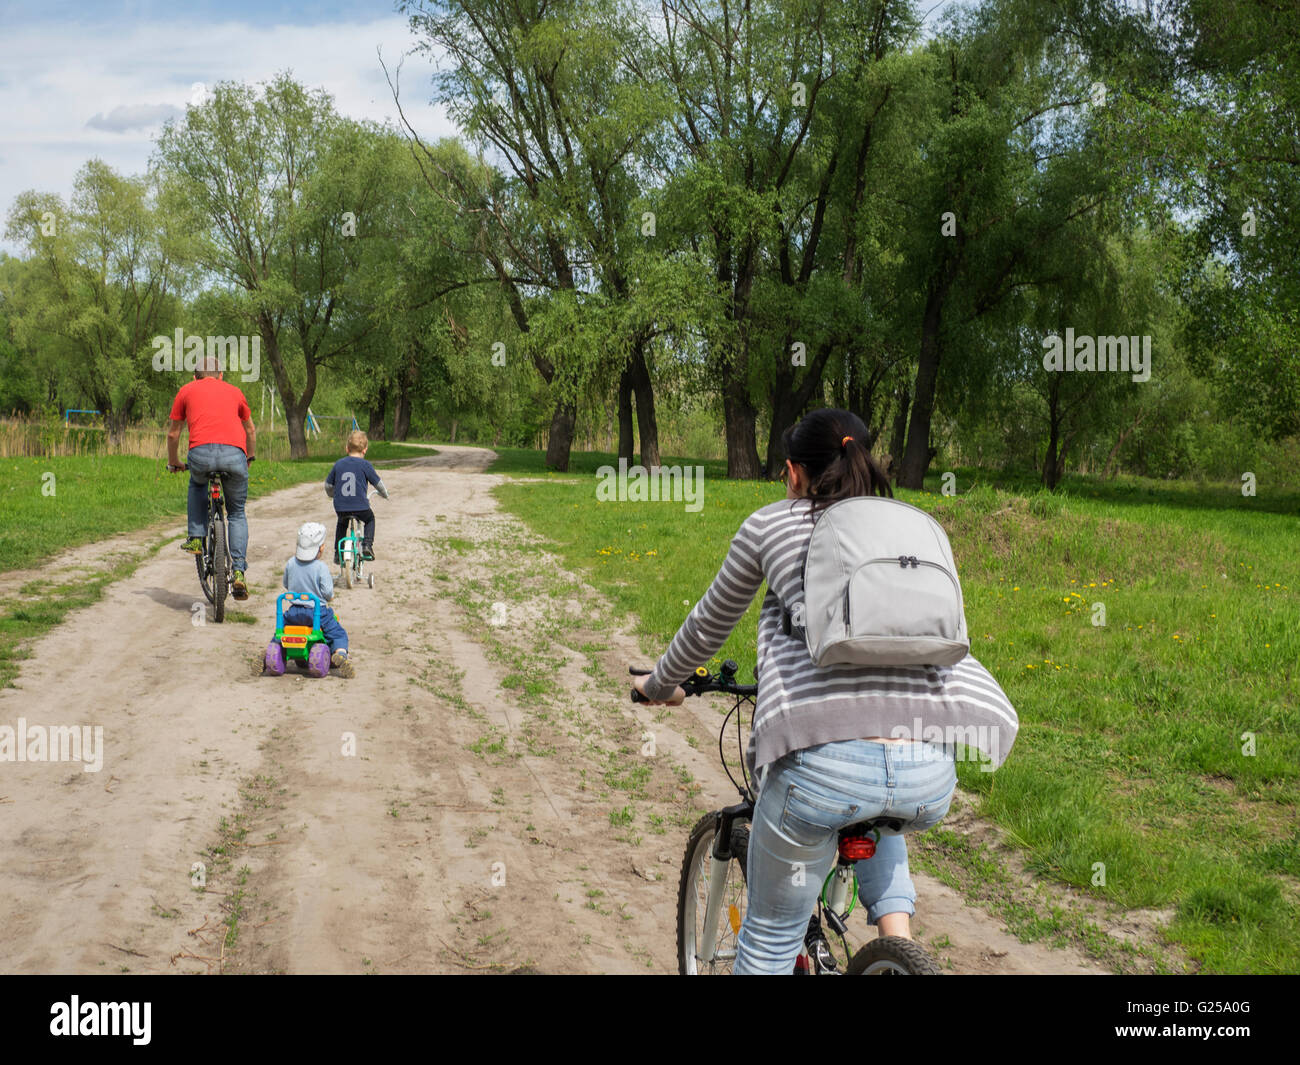 Family cycling along road in rural countryside Stock Photo